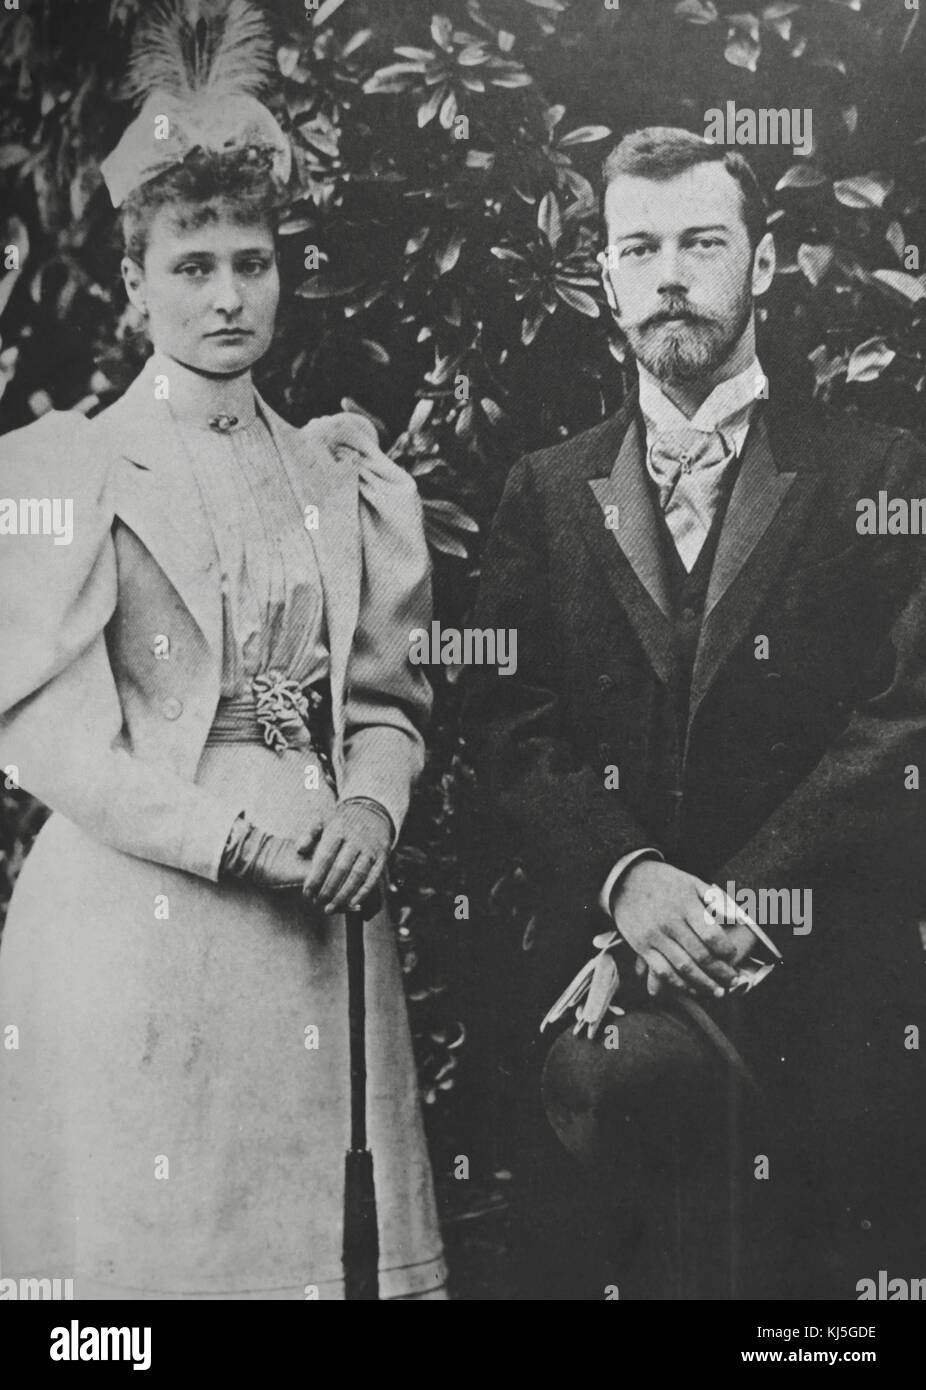 Empress Alexandra and Nicholas II of Russia. Alexandra Feodorovna (1872 – 1918), Empress of Russia as the spouse of Nicholas II, the last ruler of the Russian Empire. Originally known as Alix of Hesse and by Rhine, she was a granddaughter of Queen Victoria of the United Kingdom. Nicholas II (1868 – 1918) was the last Emperor of Russia, ruling from 1 November 1894 until his forced abdication on 15 March 1917 Stock Photo